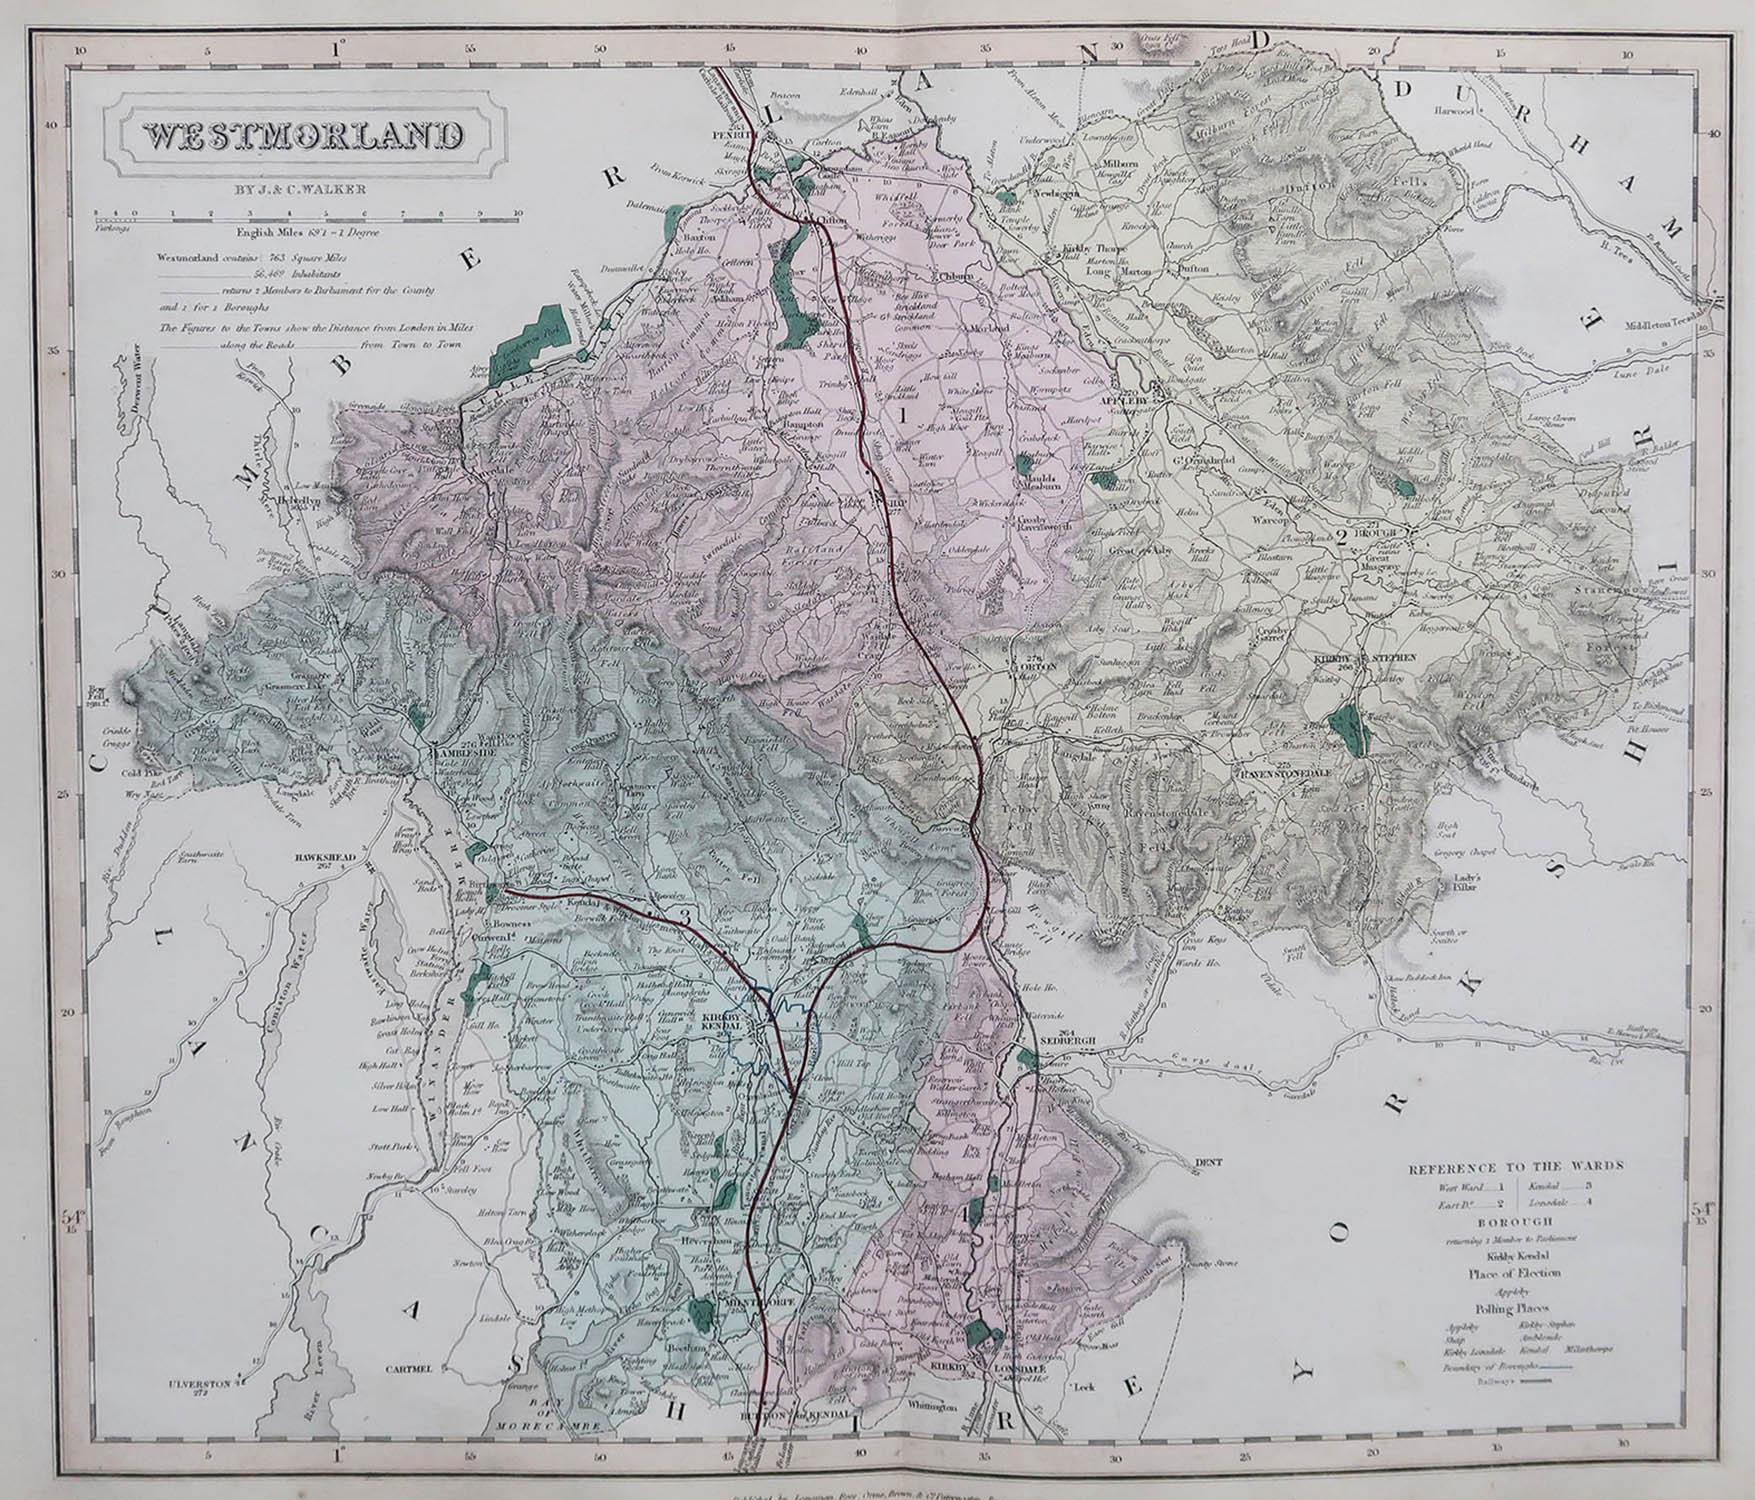 Great map of Cumbria

Original colour

By J & C Walker

Published by Longman, Rees, Orme, Brown & Co. 1851

Unframed.




